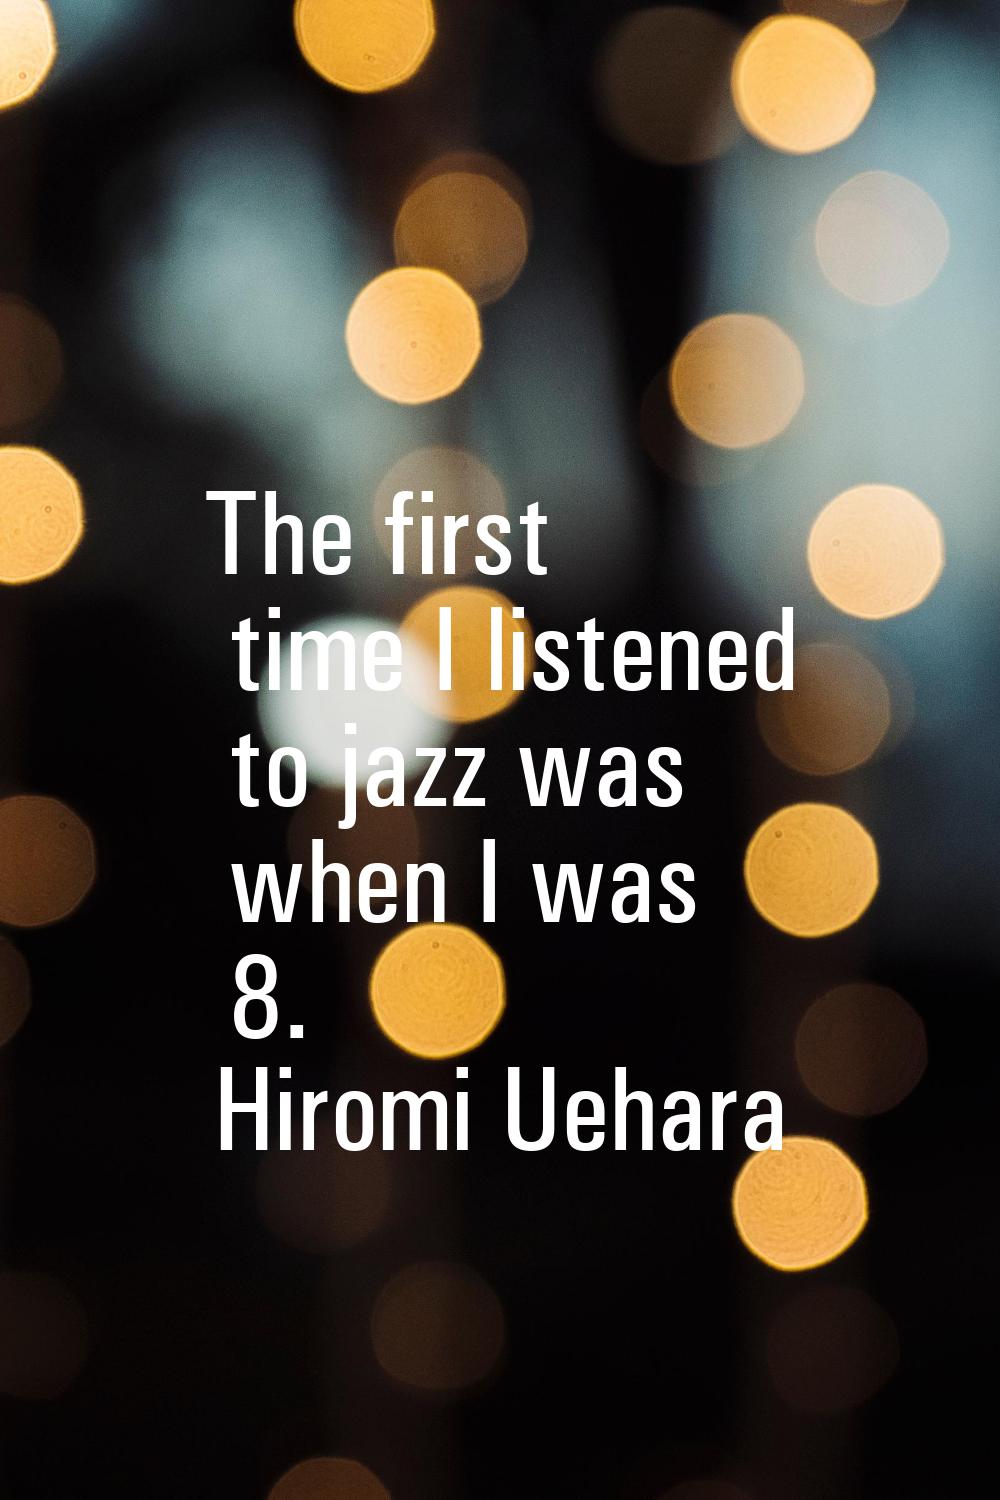 The first time I listened to jazz was when I was 8.